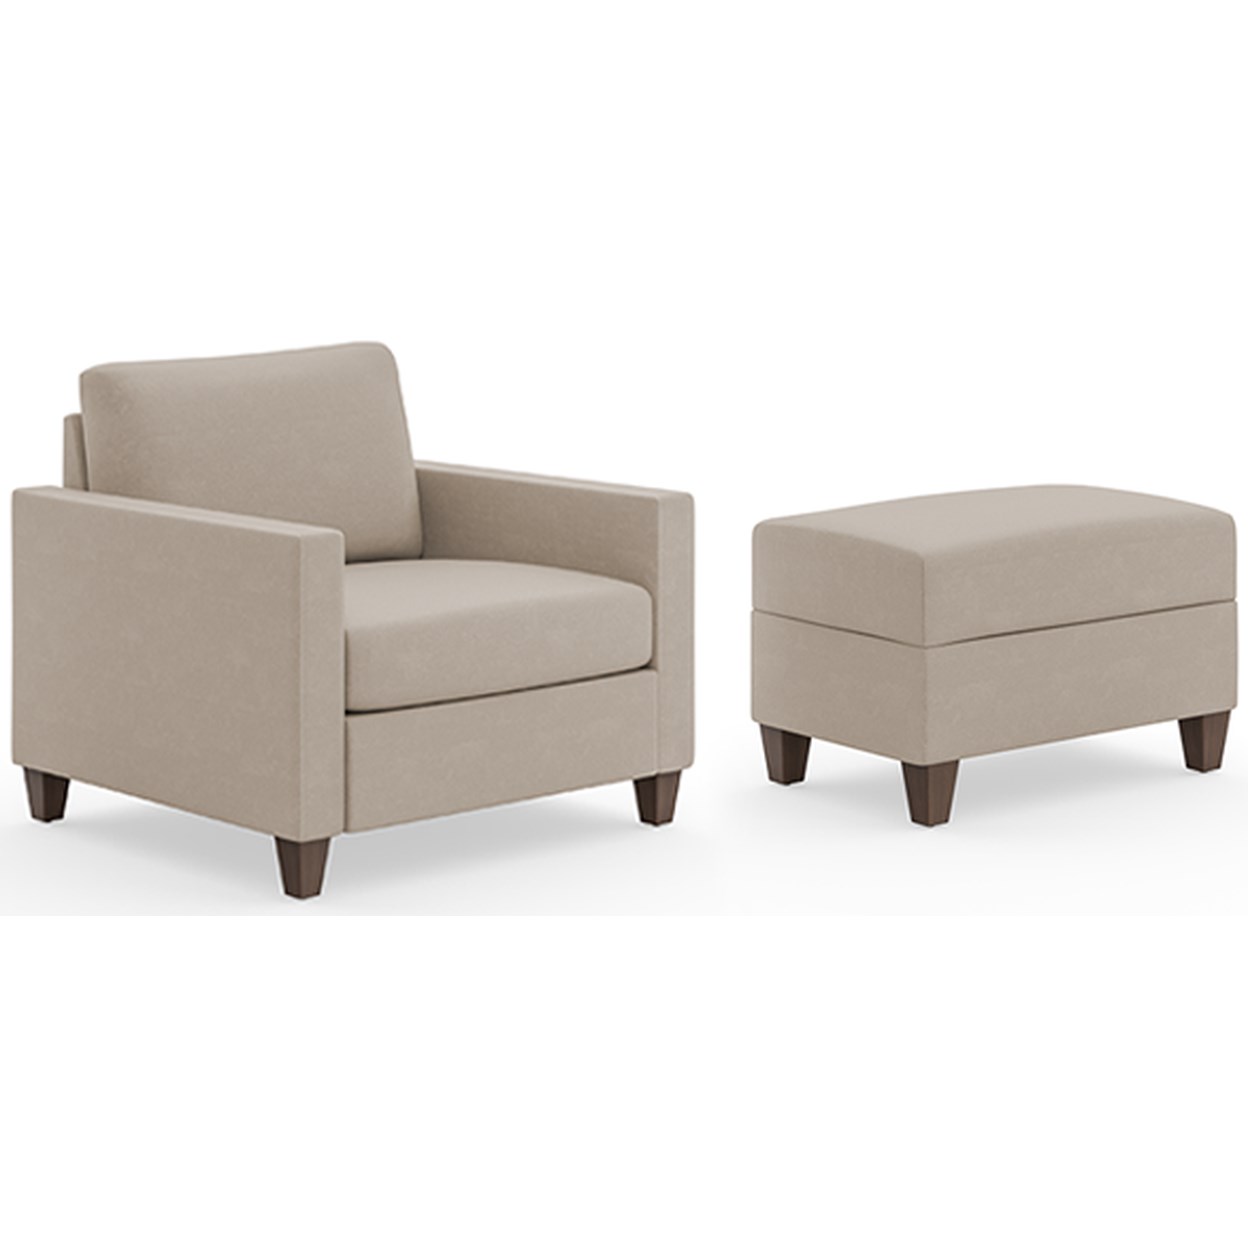 homestyles Dylan Chair and Ottoman Set